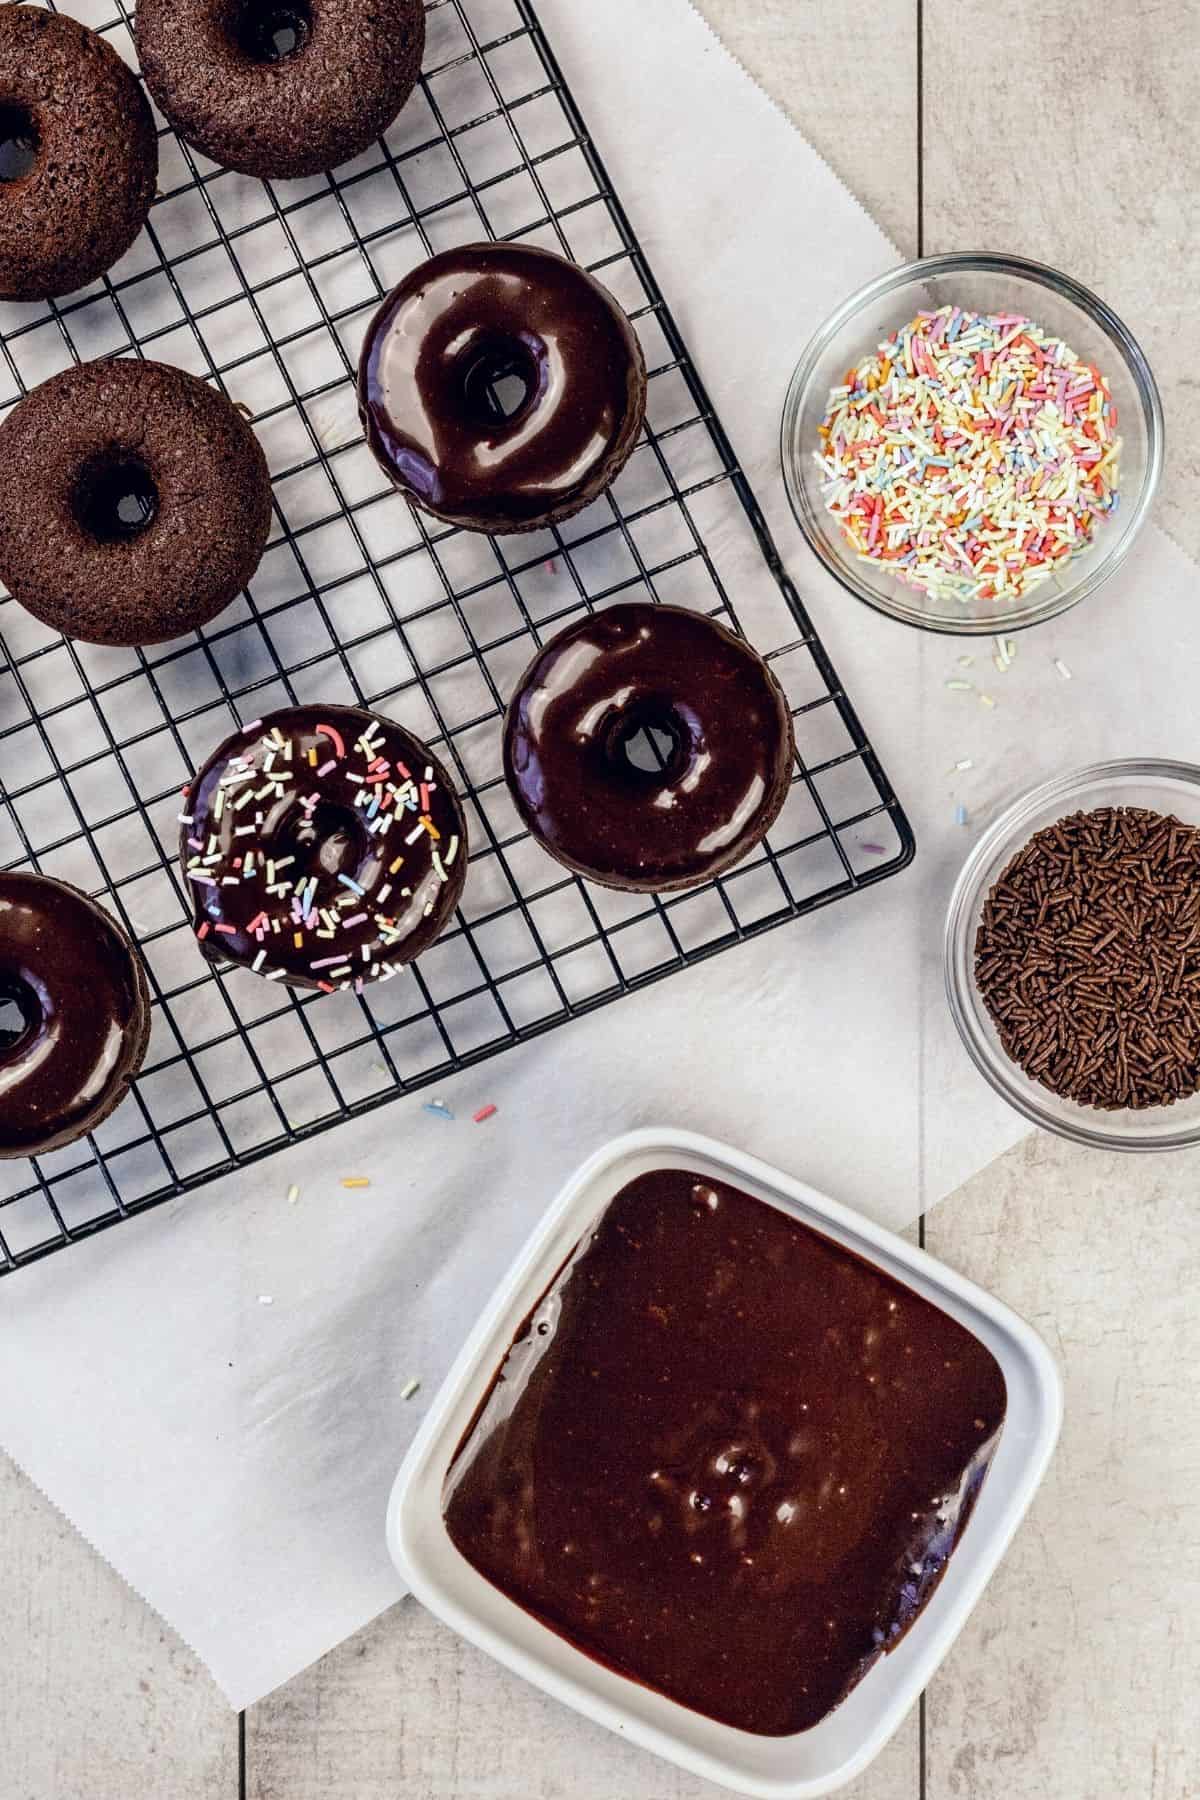 Many fully cooked chocolate donuts on a wire cooling rack next to a bowl of chocolate ganache and two small bowls filled with sprinkles. Each donut is getting dipped and sprinkled.